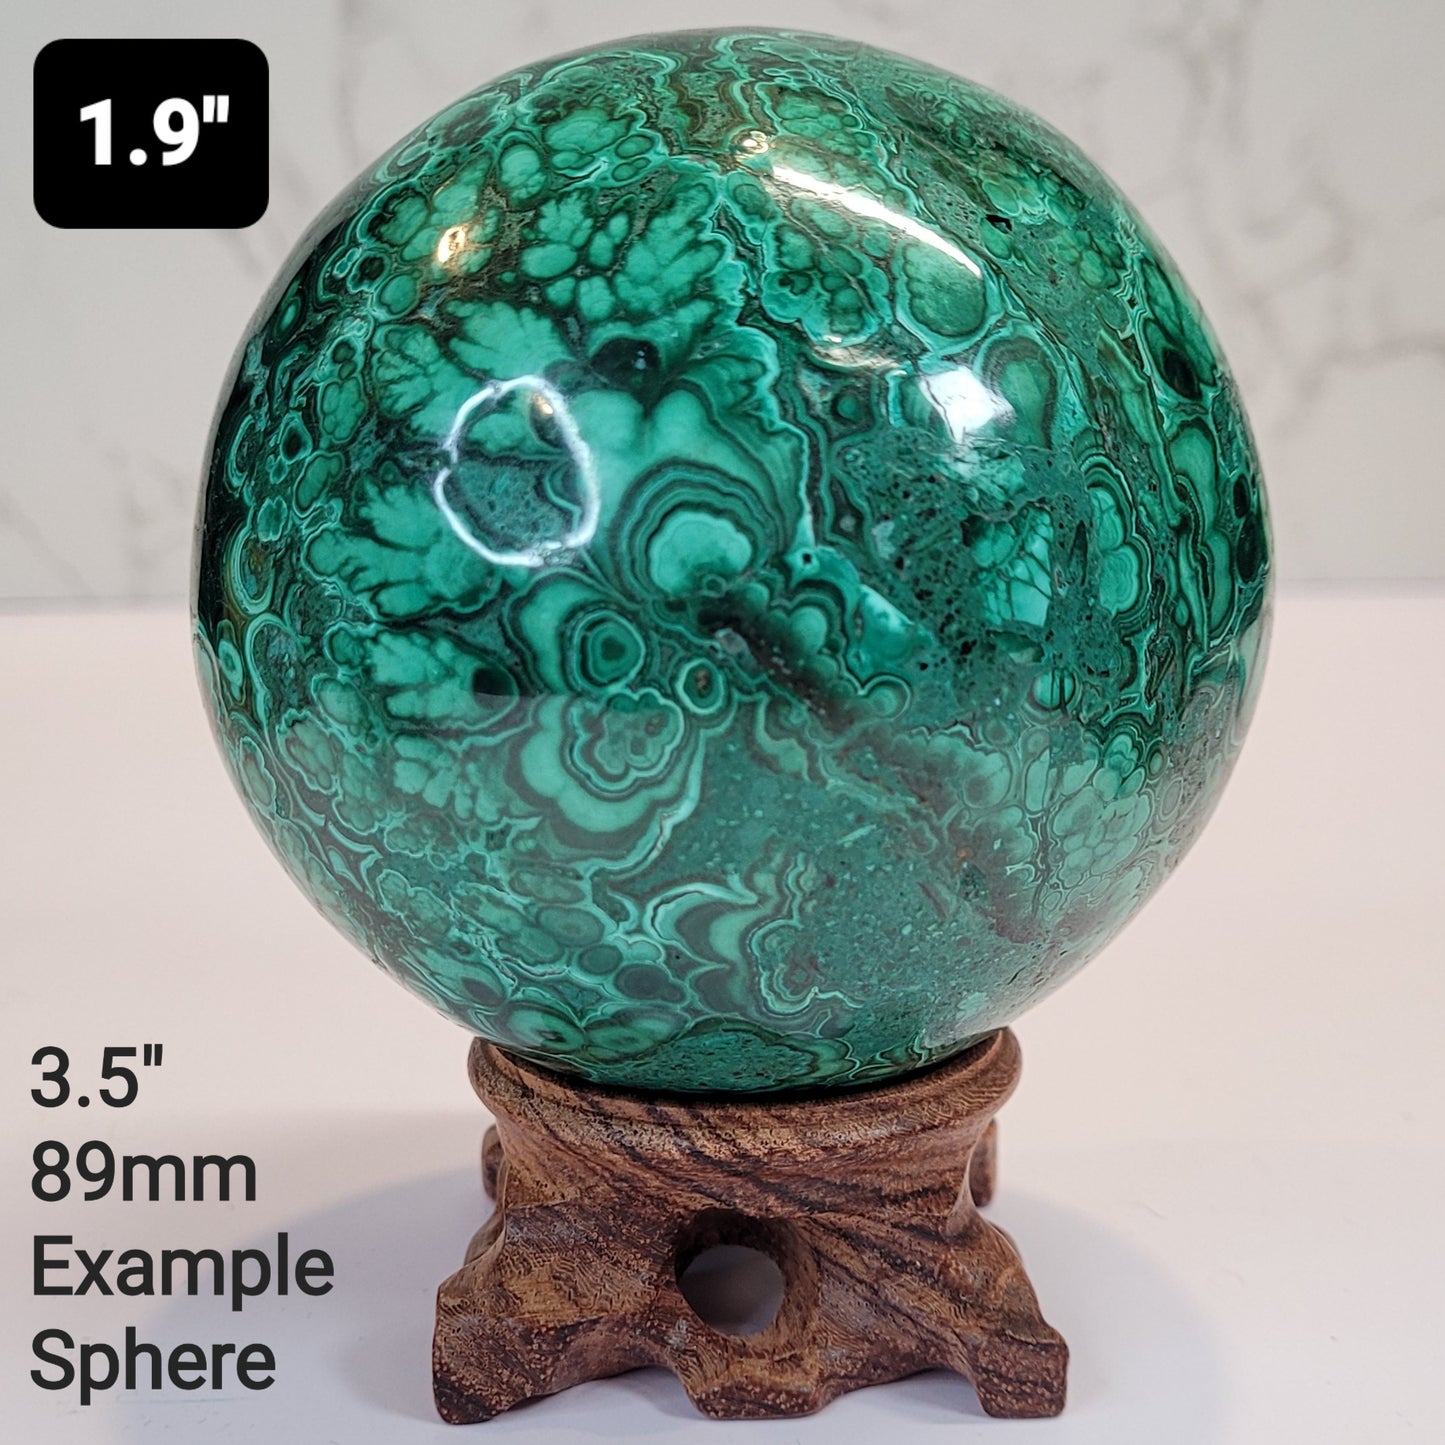 Wood Sphere Stand in 7 Sizes, Crystal Ball Holder, Display Stand for Spheres 1" to 12" (26mm to 405mm)